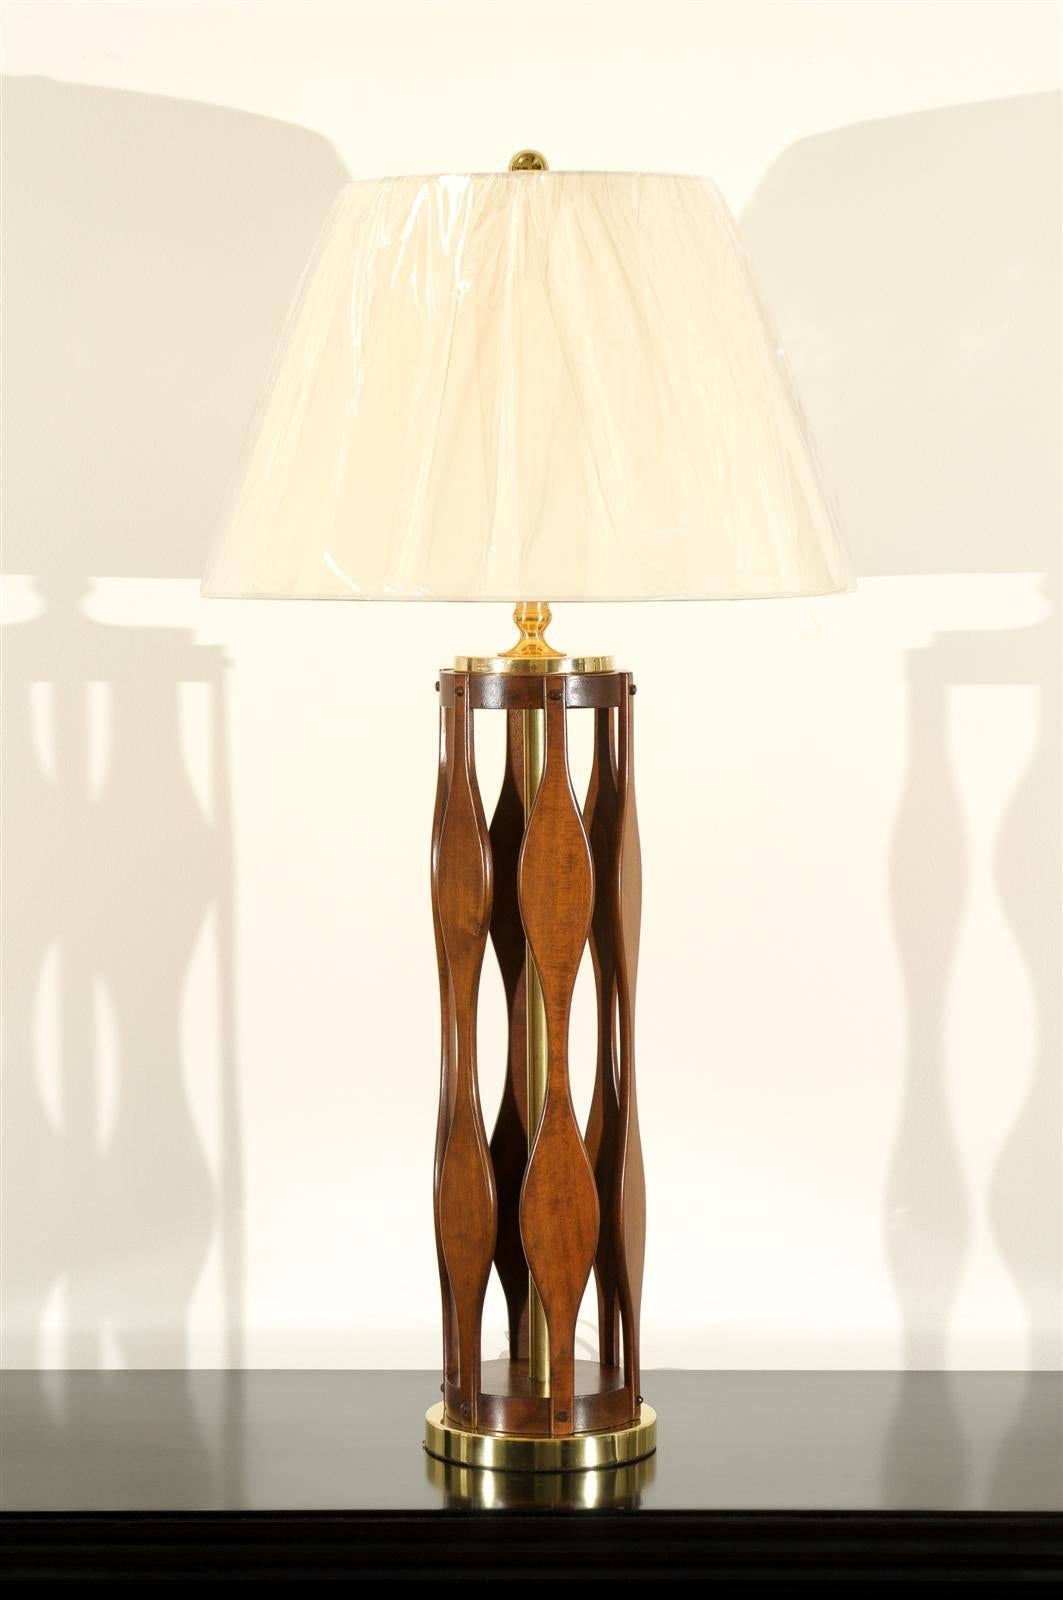 A beautifully conceived pair of large-scale vintage modern lamps, circa 1960. Pierced cylinder form constructed from individual pieces of solid Walnut with Dowel joints. Solid brass accents. Fabulous detail and craftsmanship. Dramatic jewelry!